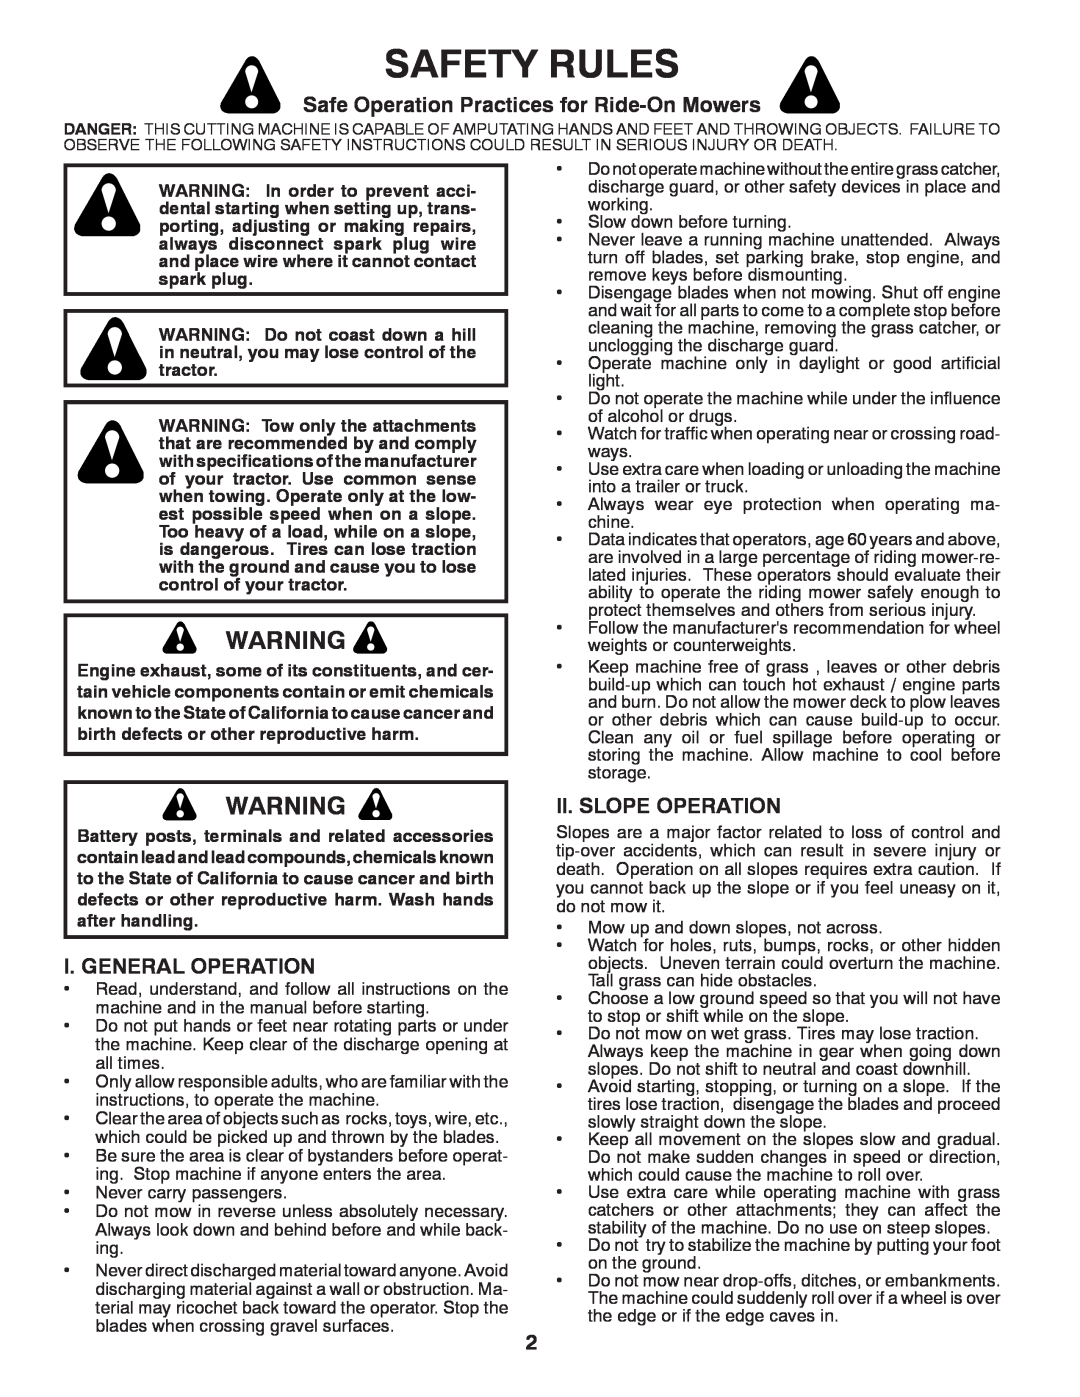 Poulan 430094 manual Safety Rules, Safe Operation Practices for Ride-OnMowers, I. General Operation, Ii. Slope Operation 